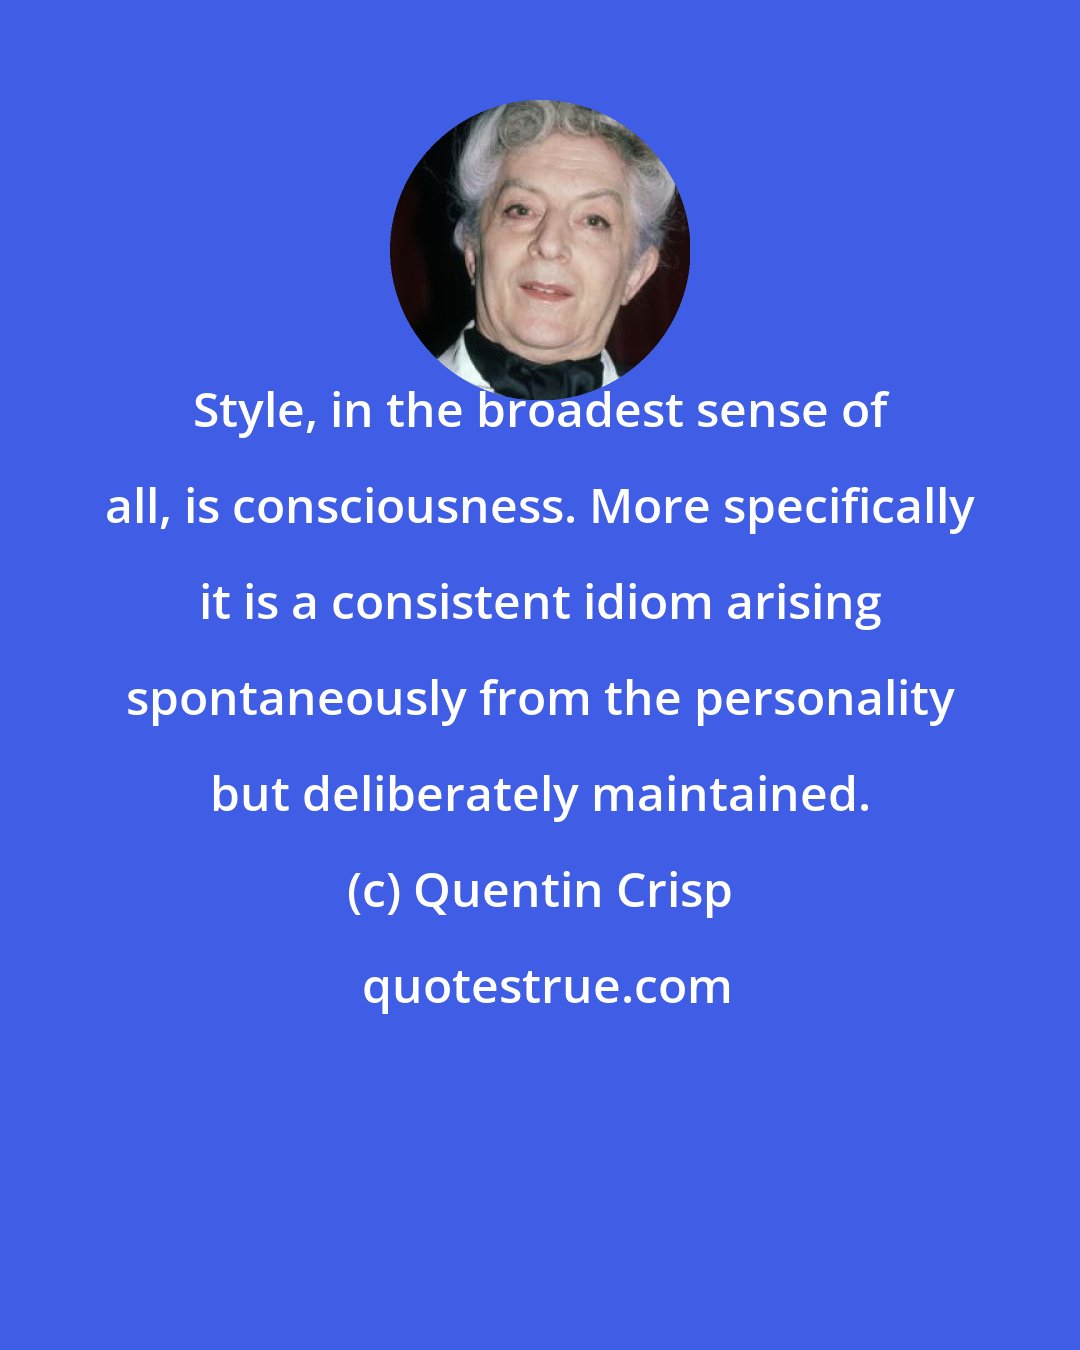 Quentin Crisp: Style, in the broadest sense of all, is consciousness. More specifically it is a consistent idiom arising spontaneously from the personality but deliberately maintained.